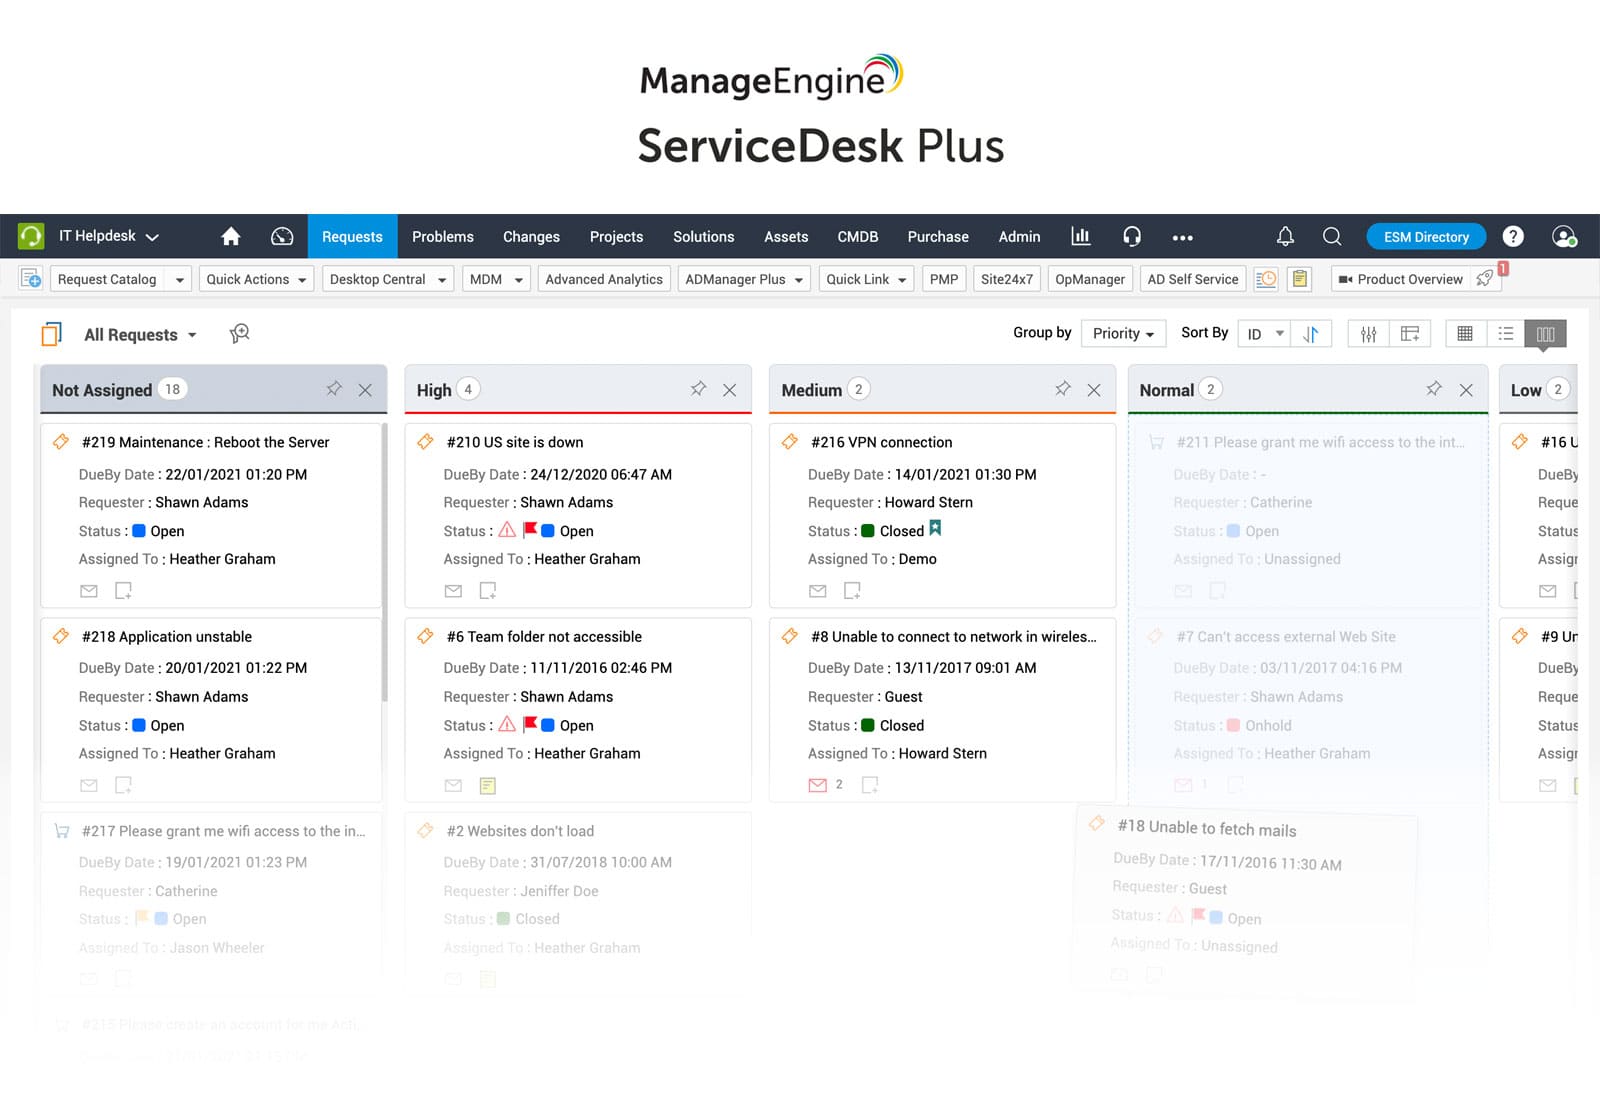 ManageEngine's user interface. Even though its offering is cost-effective, the UX is significantly outdated.